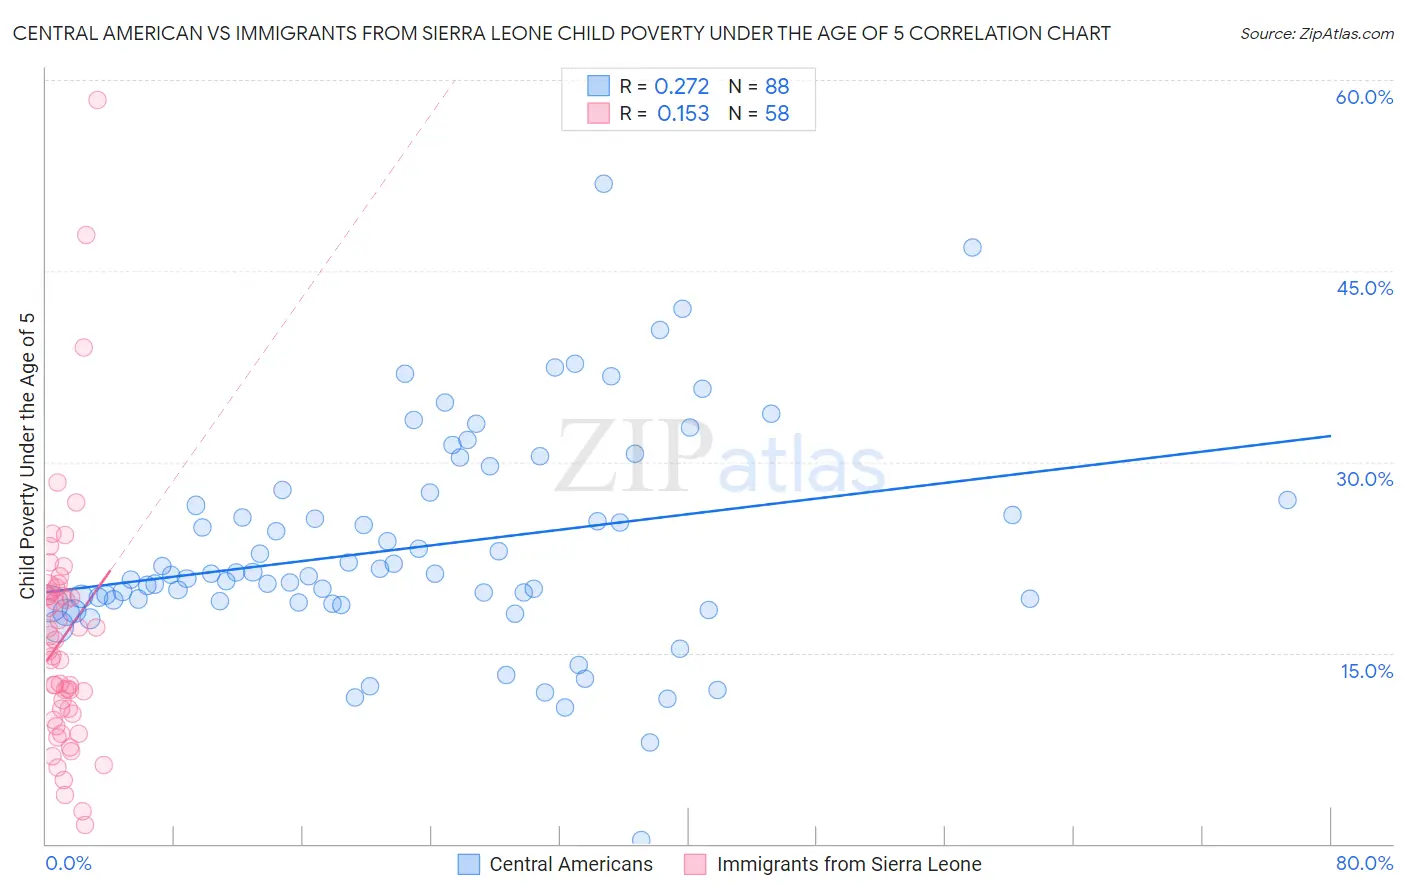 Central American vs Immigrants from Sierra Leone Child Poverty Under the Age of 5